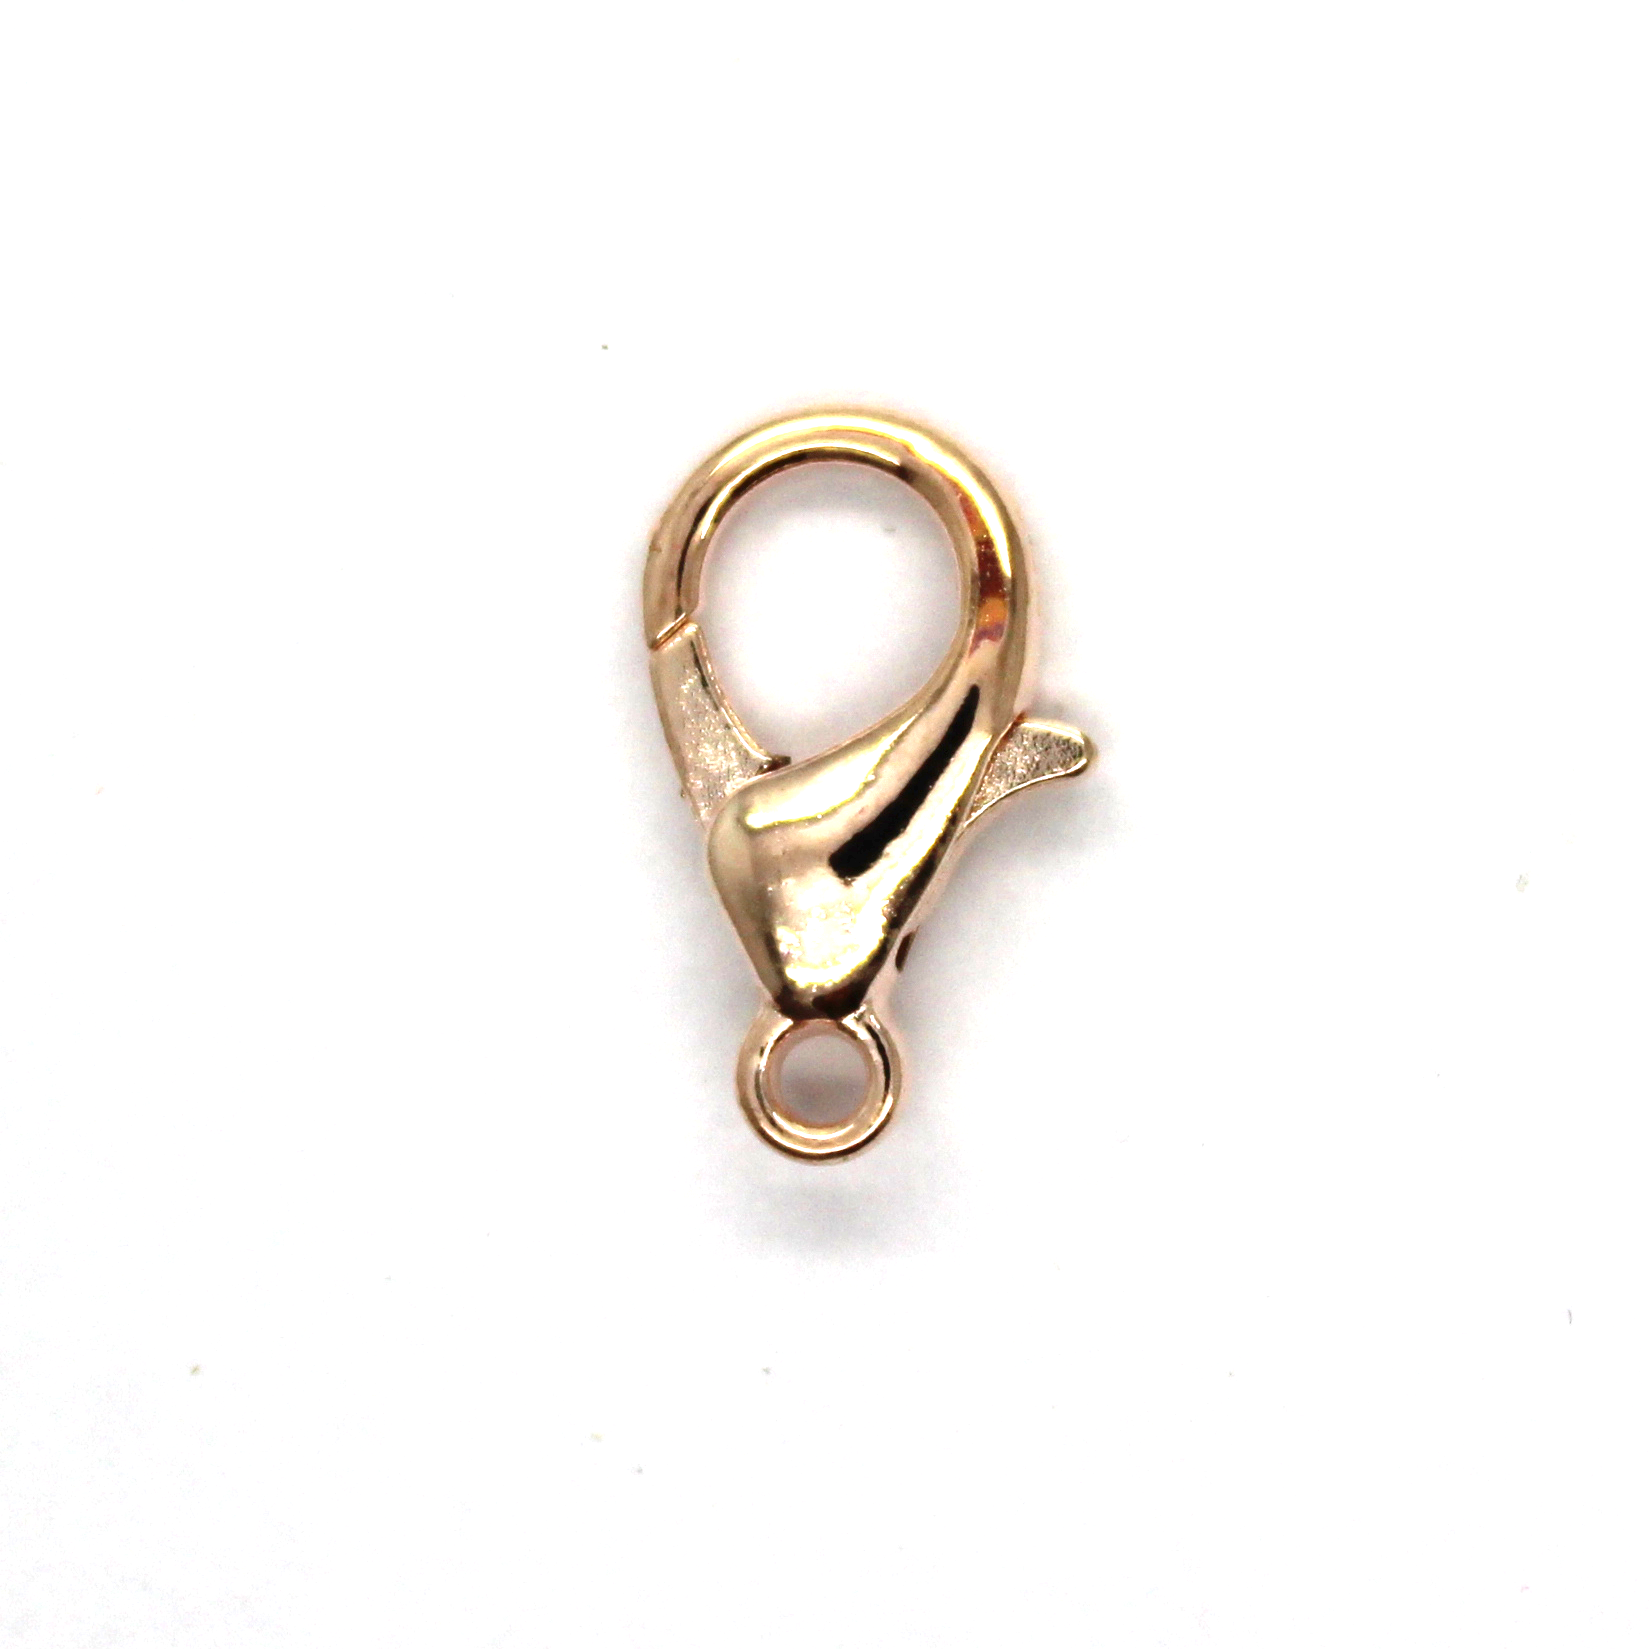 Clasp, Lobster Clasp, Alloy, Rose Gold, 18mm x 11mm x 4mm, Sold Per pkg of 10